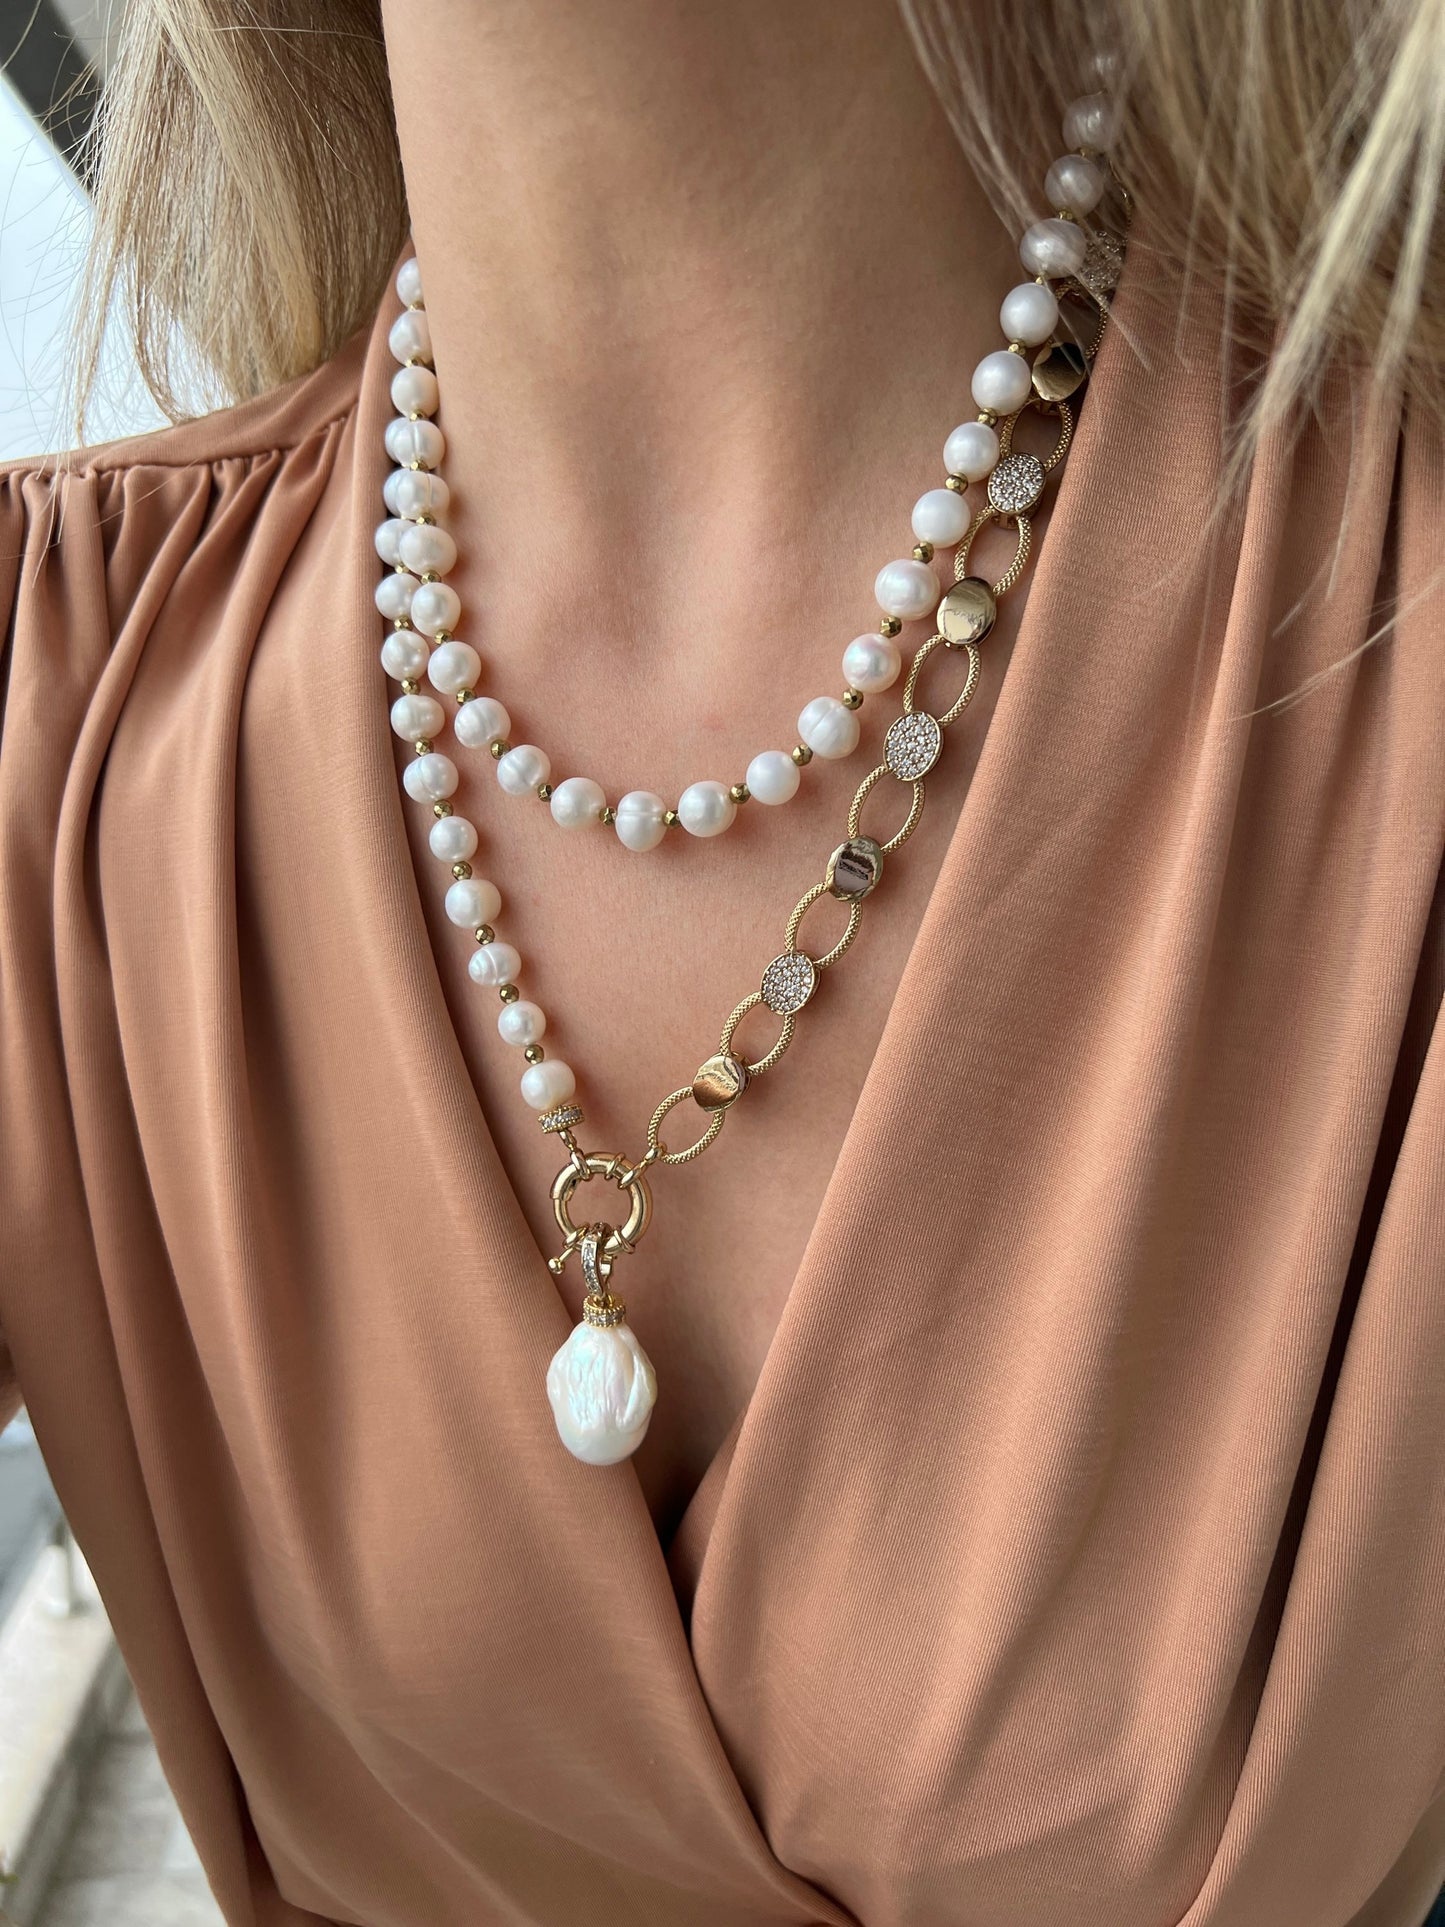 Pearl Necklace, Unique Baroque Pendant Pearl Jewelry with Zircon Chain, Handmade Statement Necklace for Christmas Gift, Layered Pearl Jewel